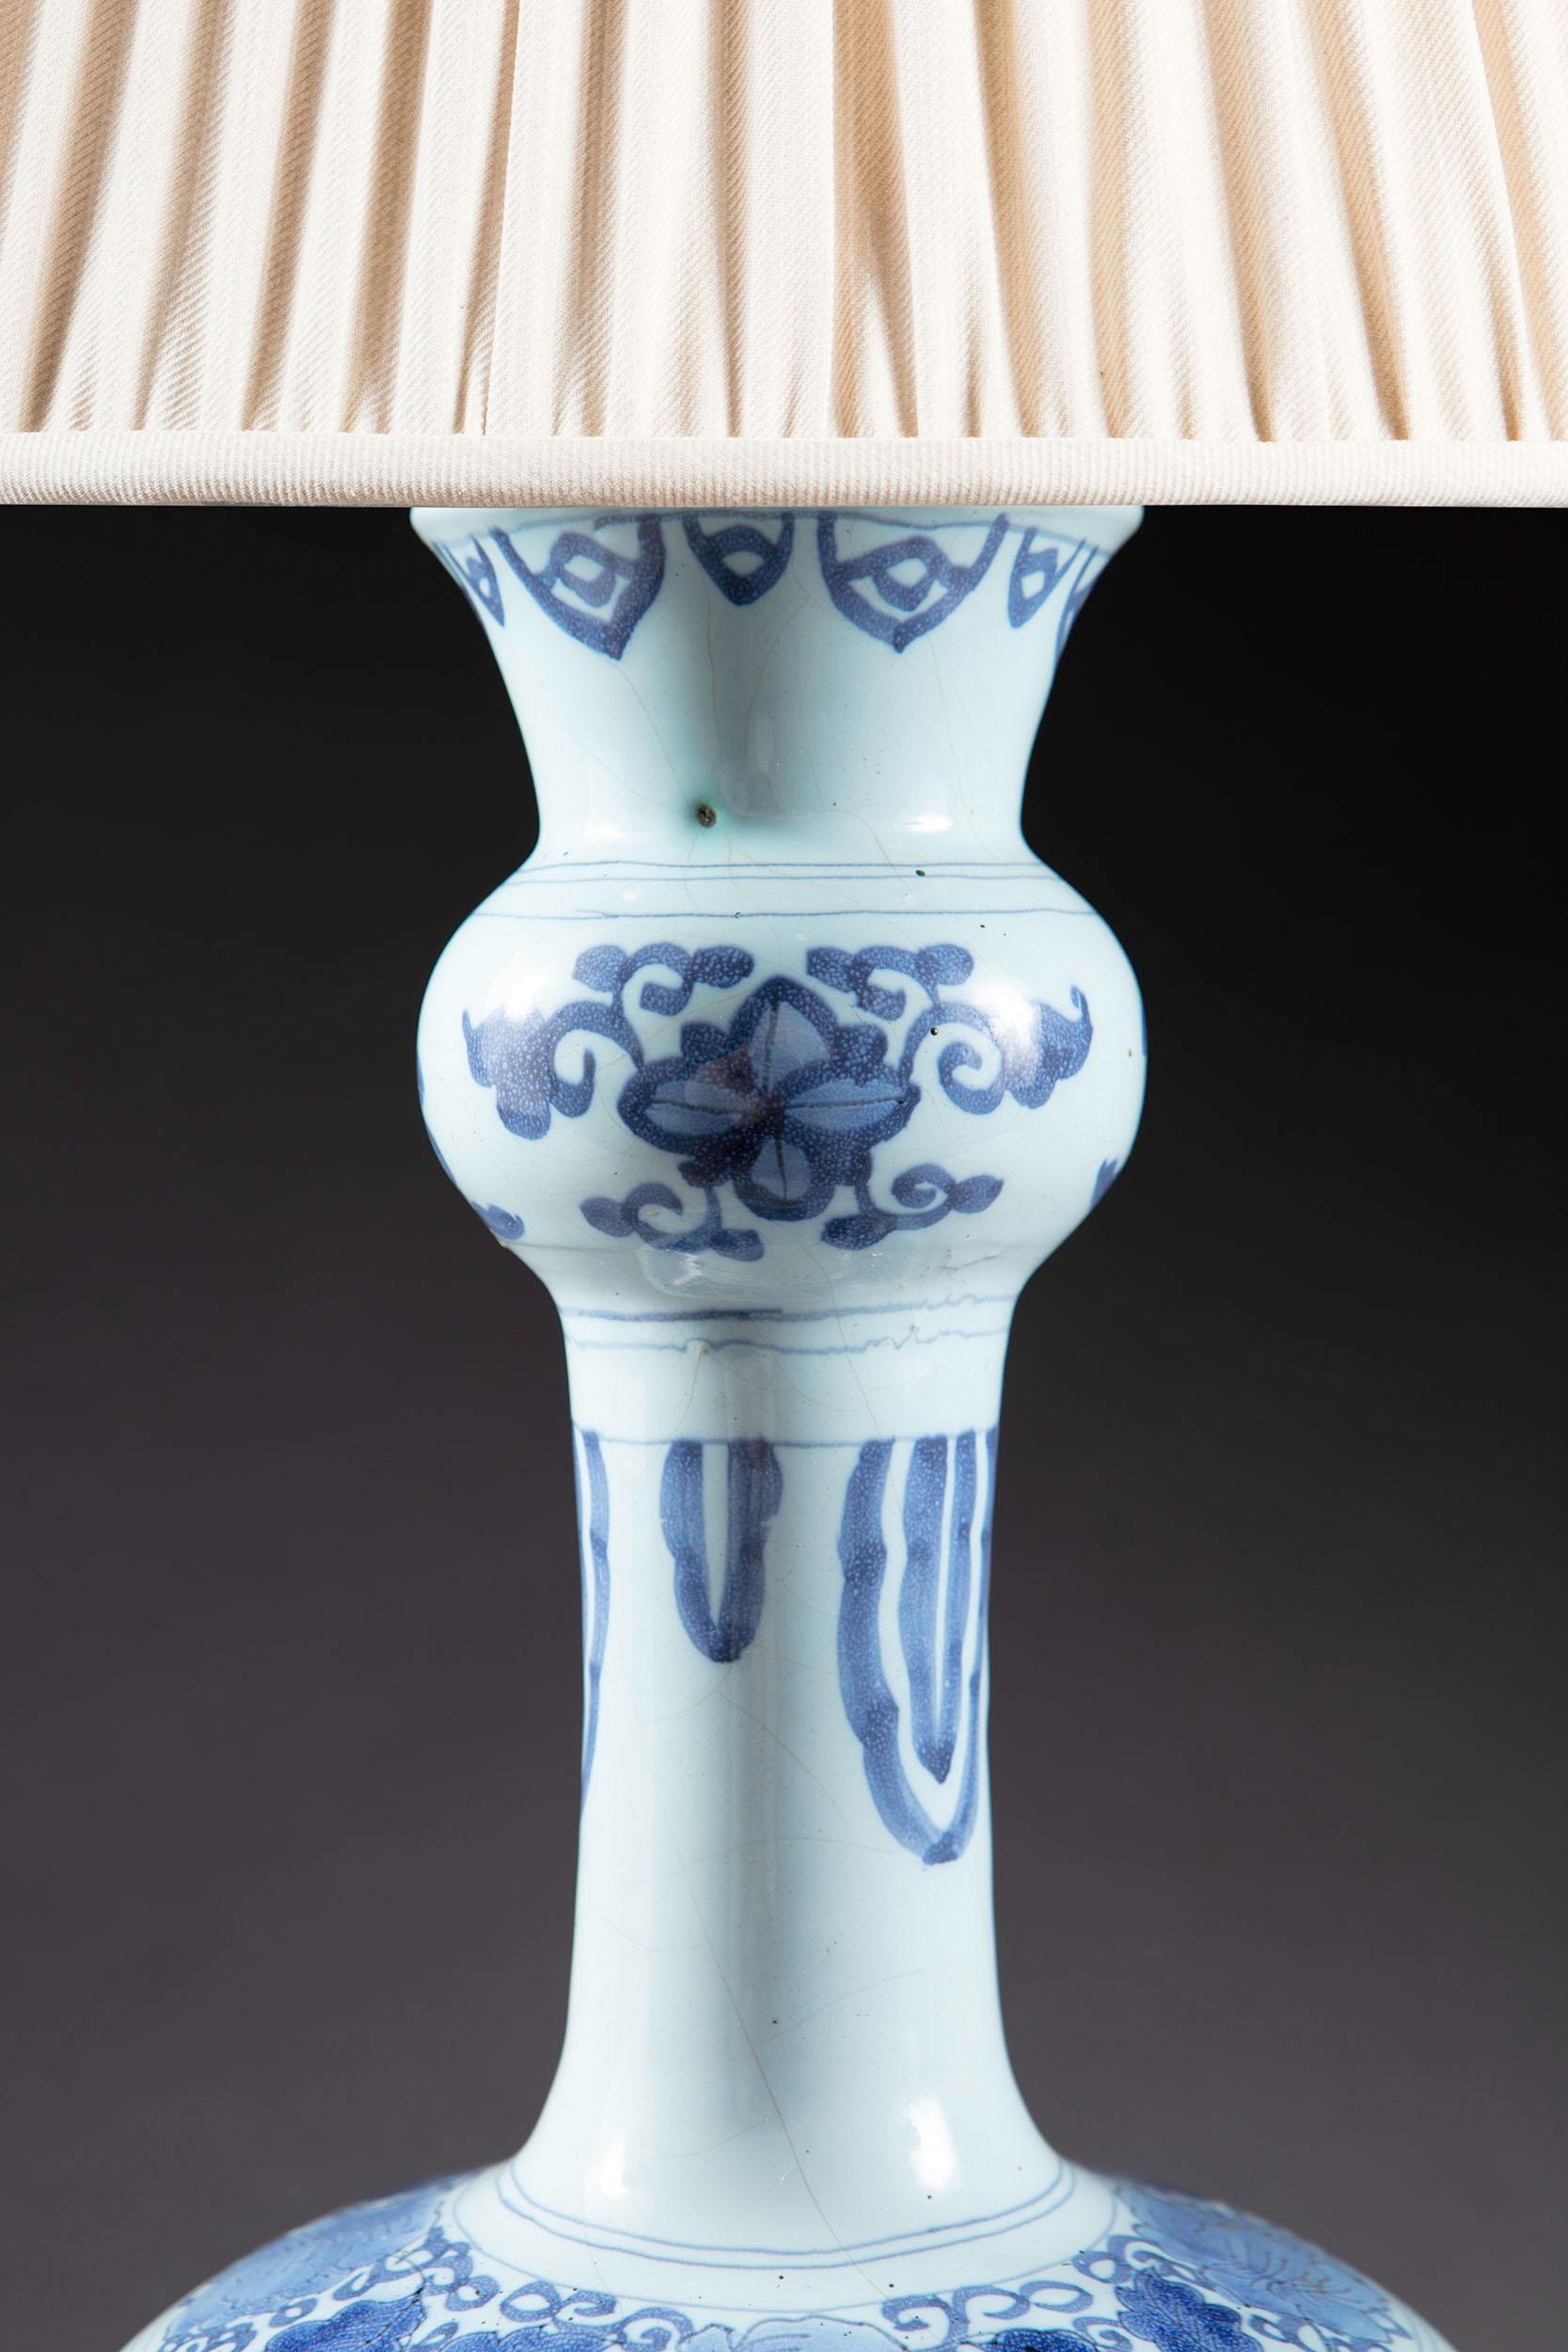 Chinoiserie Pair of Early 18th Century Dutch Delft Knobble Vases Mounted as Table Lamps